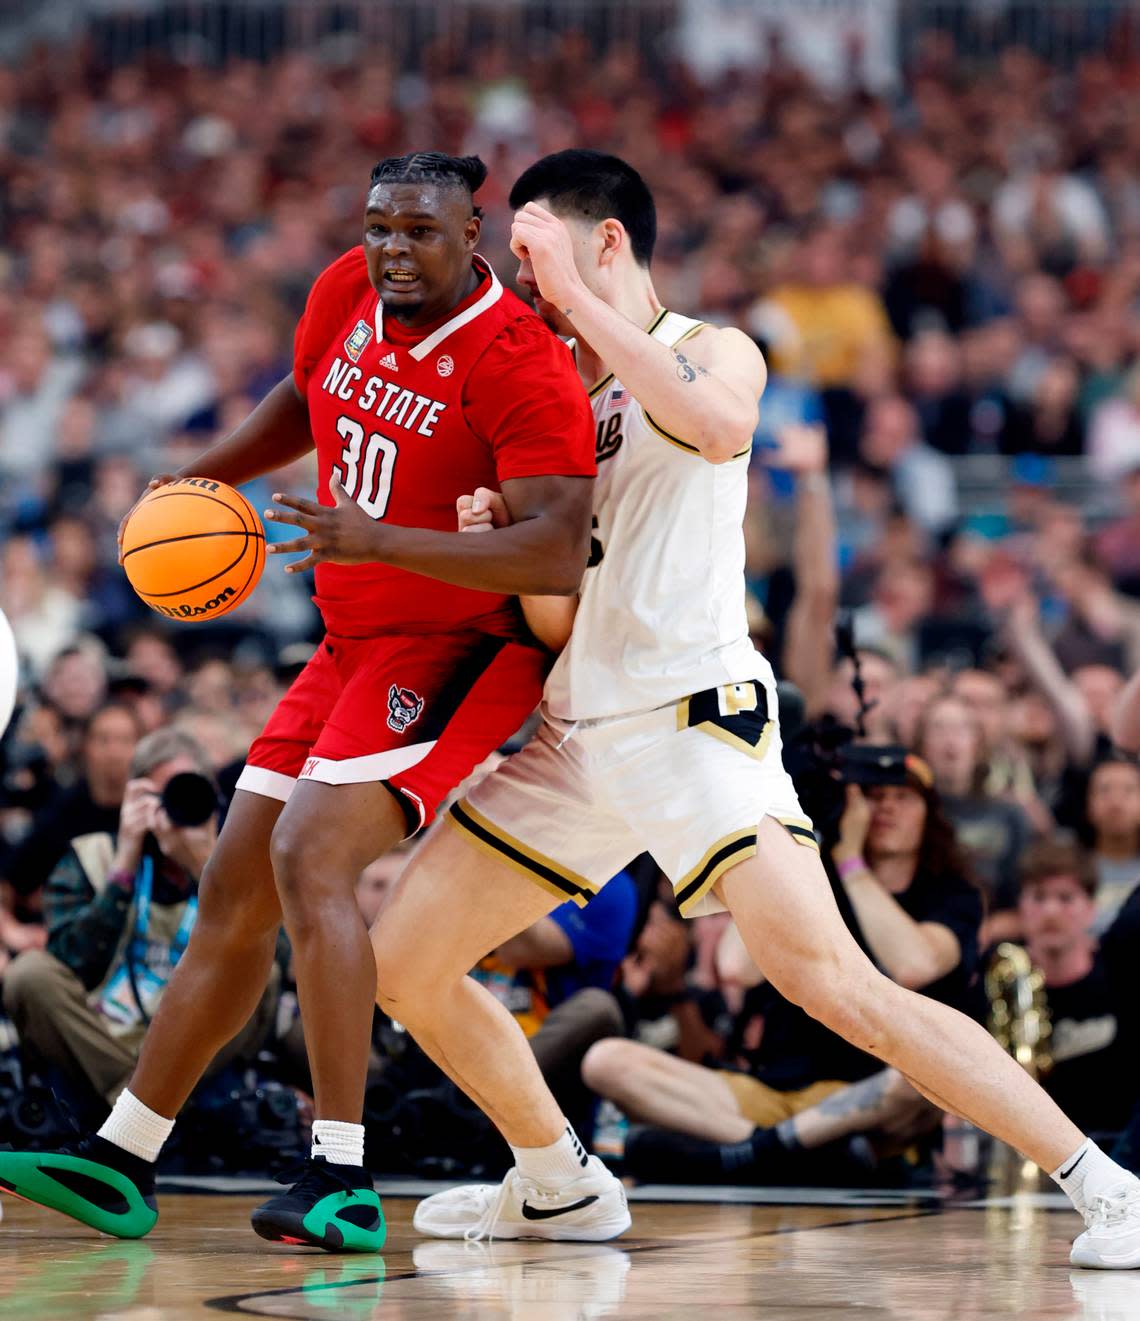 NC State’s DJ Burns tries to muscle to the basket against Purdue’s Zach Edey during the first half of their NCAA Final Four game. Ethan Hyman/ehyman@newsobserver.com